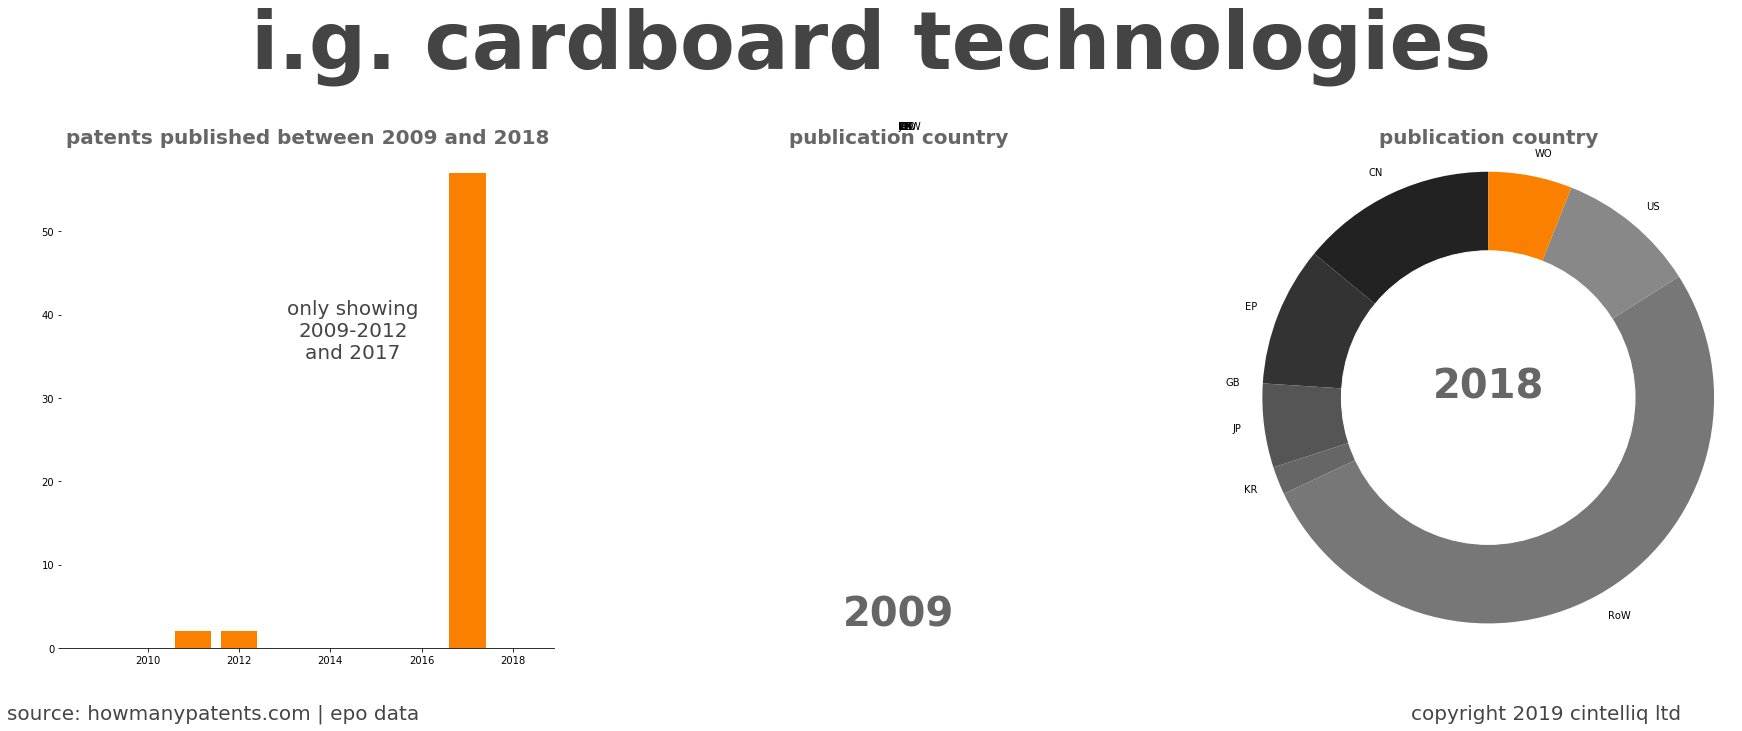 summary of patents for I.G. Cardboard Technologies